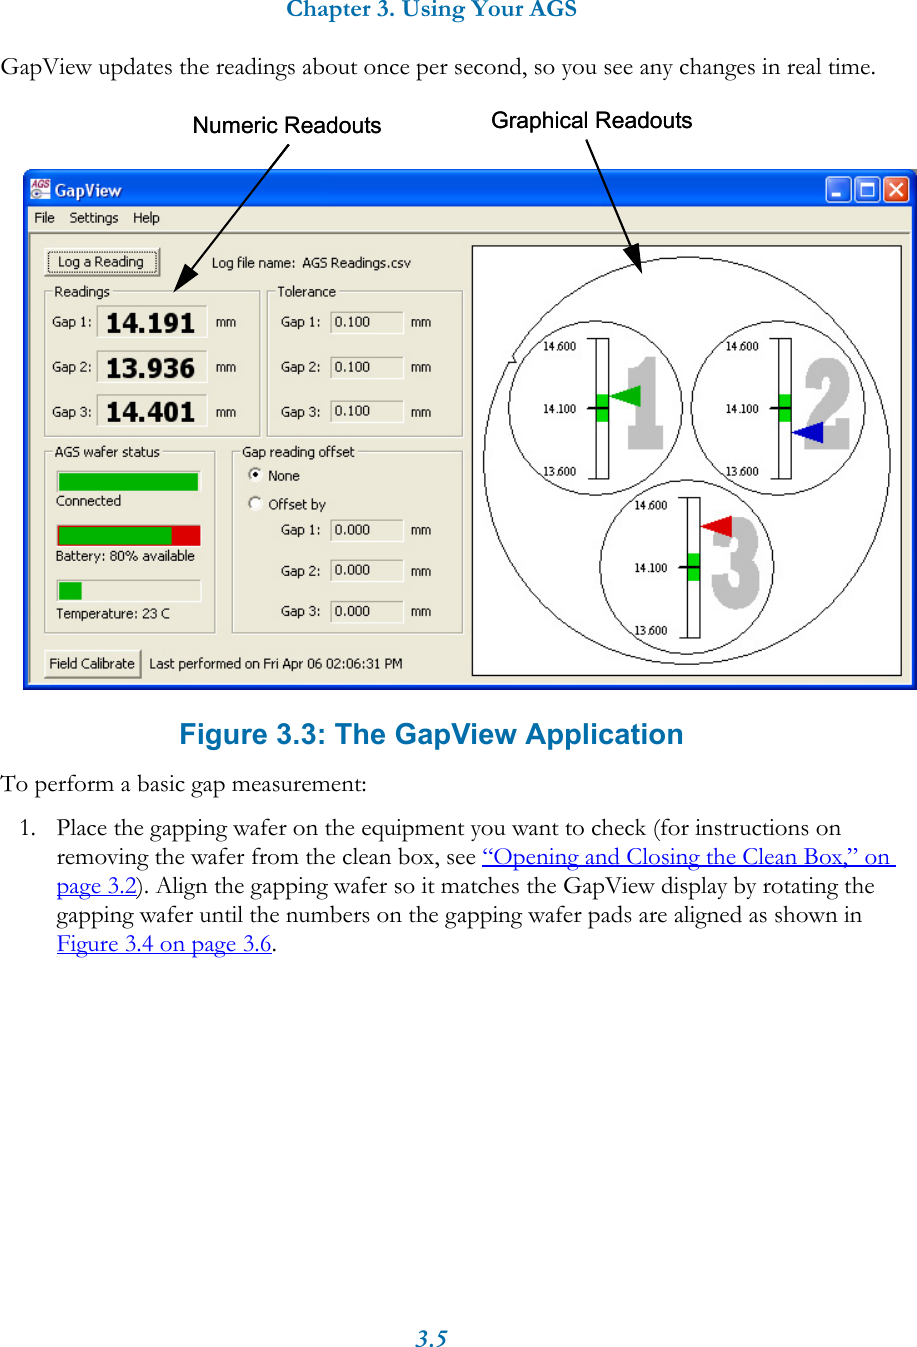 Chapter 3. Using Your AGS3.5GapView updates the readings about once per second, so you see any changes in real time. Figure 3.3: The GapView ApplicationTo perform a basic gap measurement:1. Place the gapping wafer on the equipment you want to check (for instructions on removing the wafer from the clean box, see “Opening and Closing the Clean Box,” on page 3.2). Align the gapping wafer so it matches the GapView display by rotating the gapping wafer until the numbers on the gapping wafer pads are aligned as shown in Figure 3.4 on page 3.6.Numeric Readouts Graphical ReadoutsNumeric Readouts Graphical Readouts